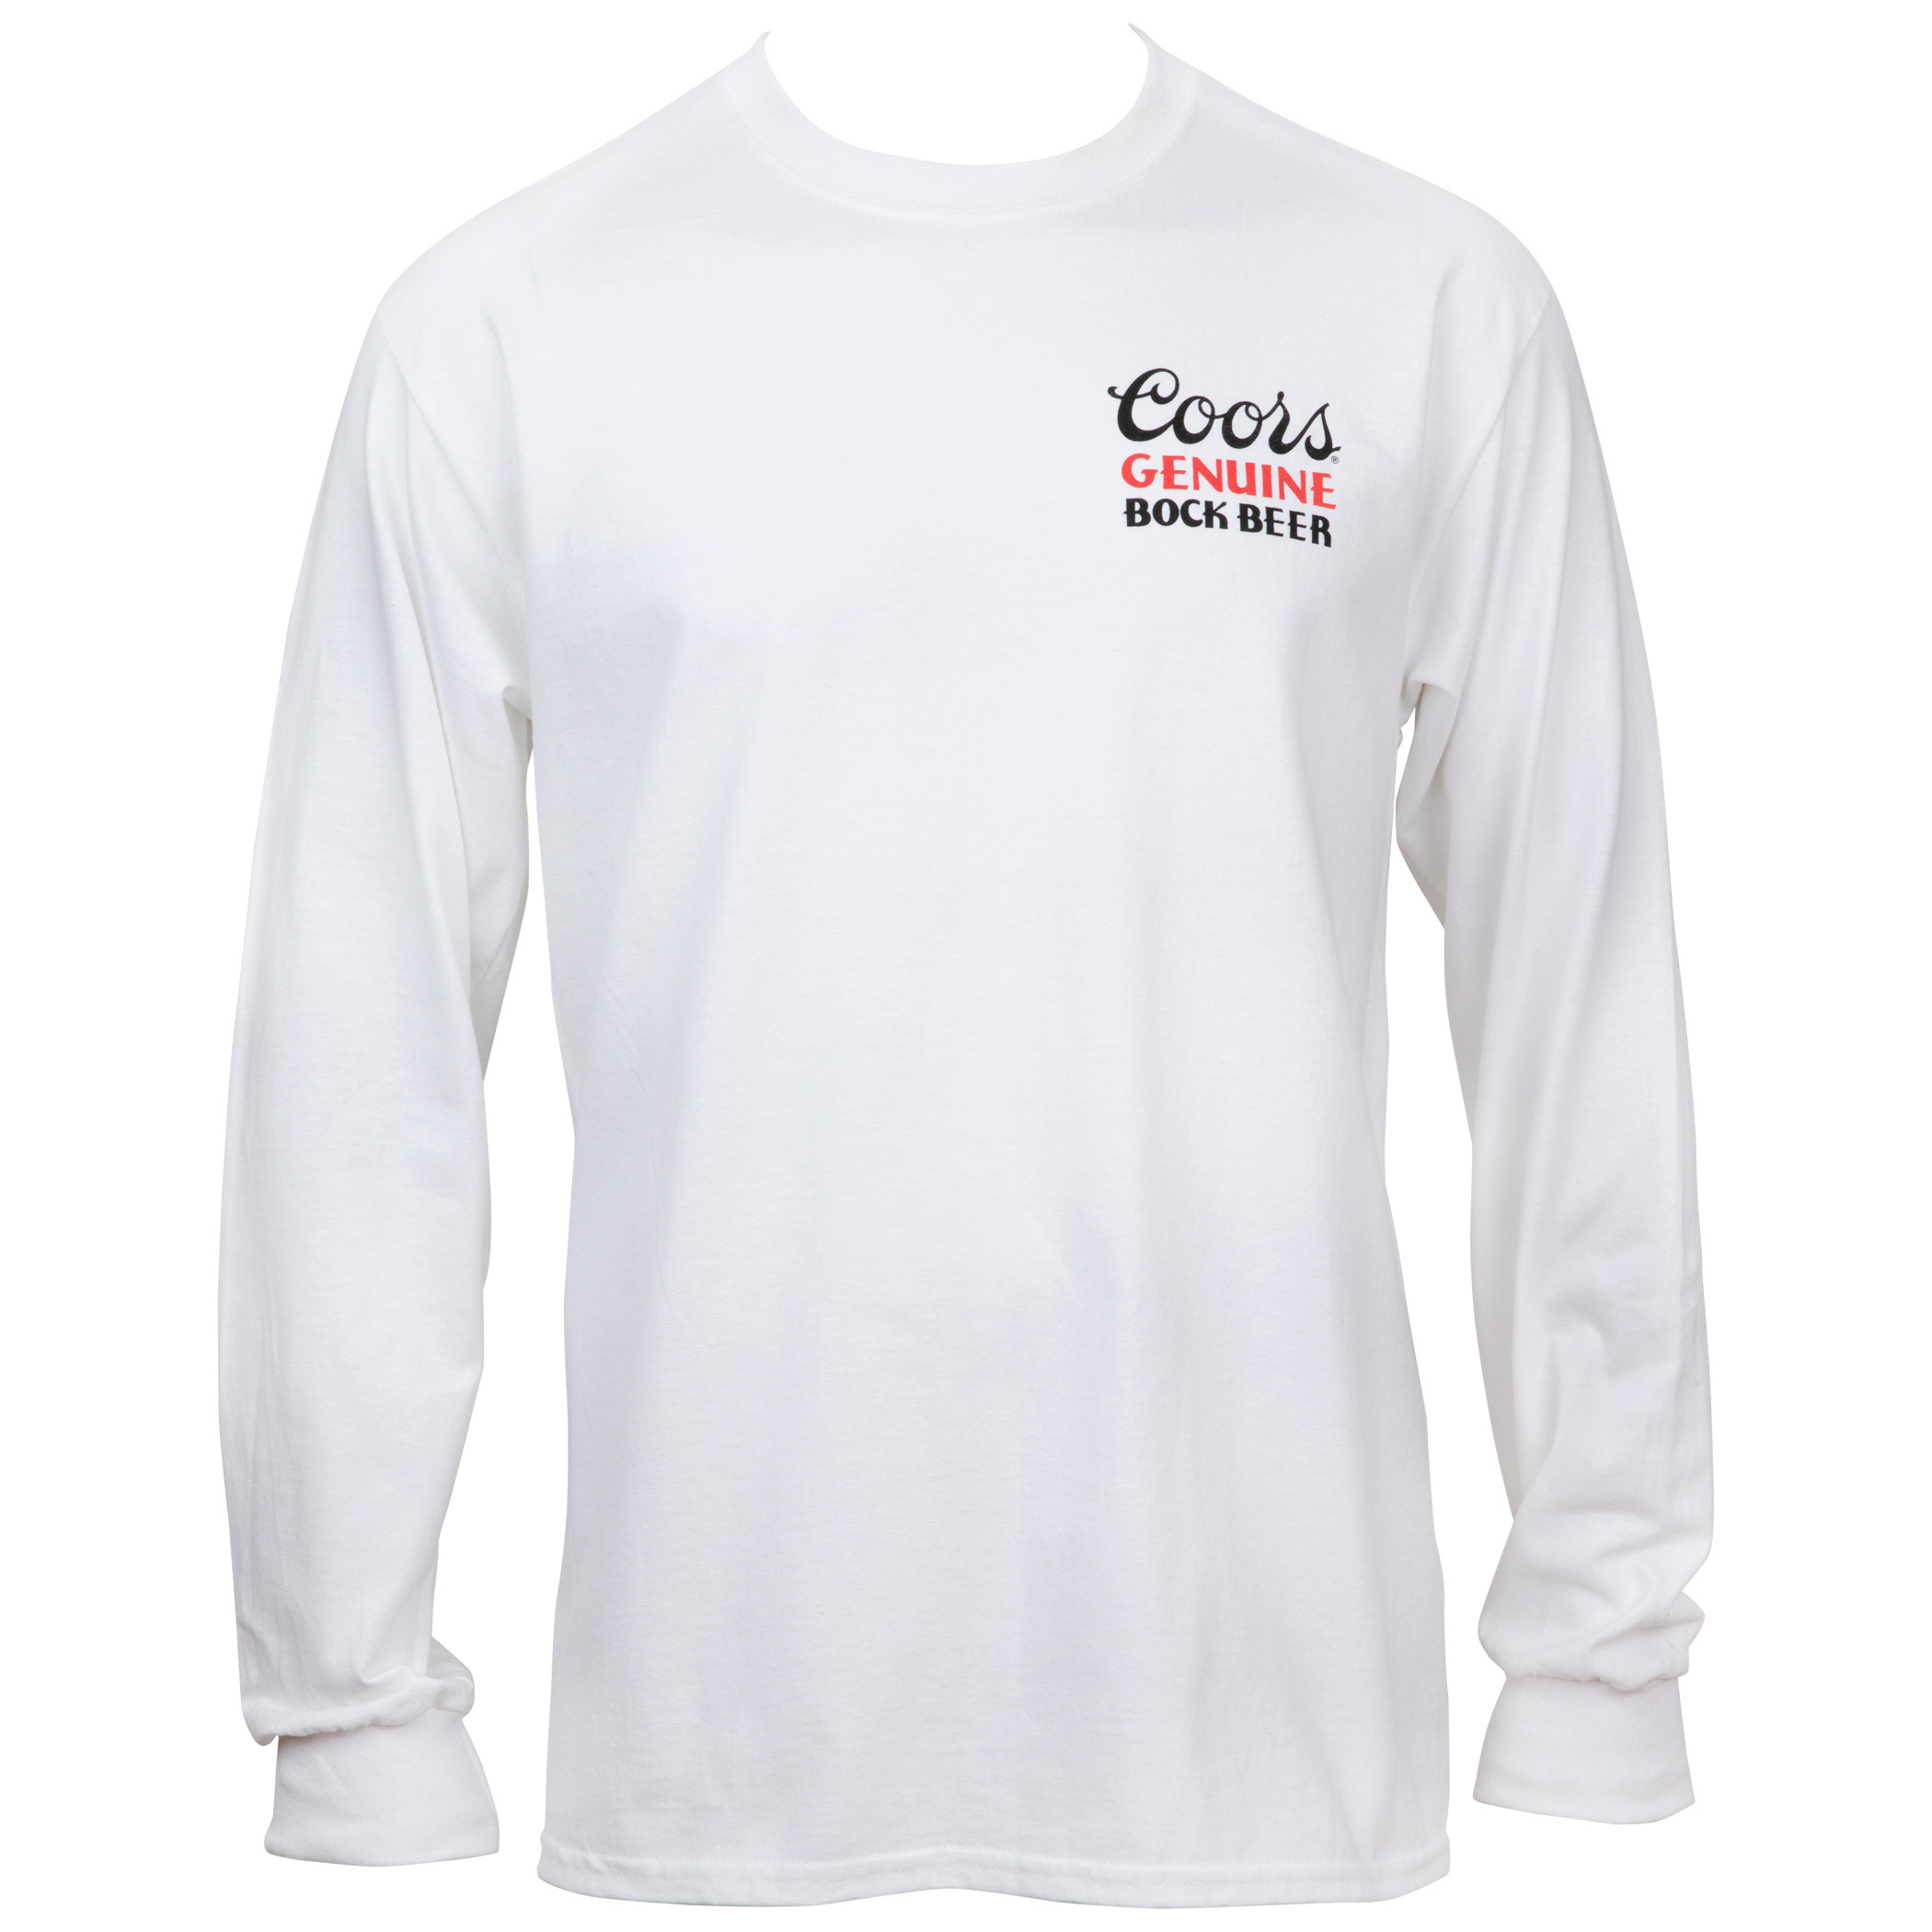 Coors Genuine Bock Beer Long Sleeve Shirt with Front and Back Print